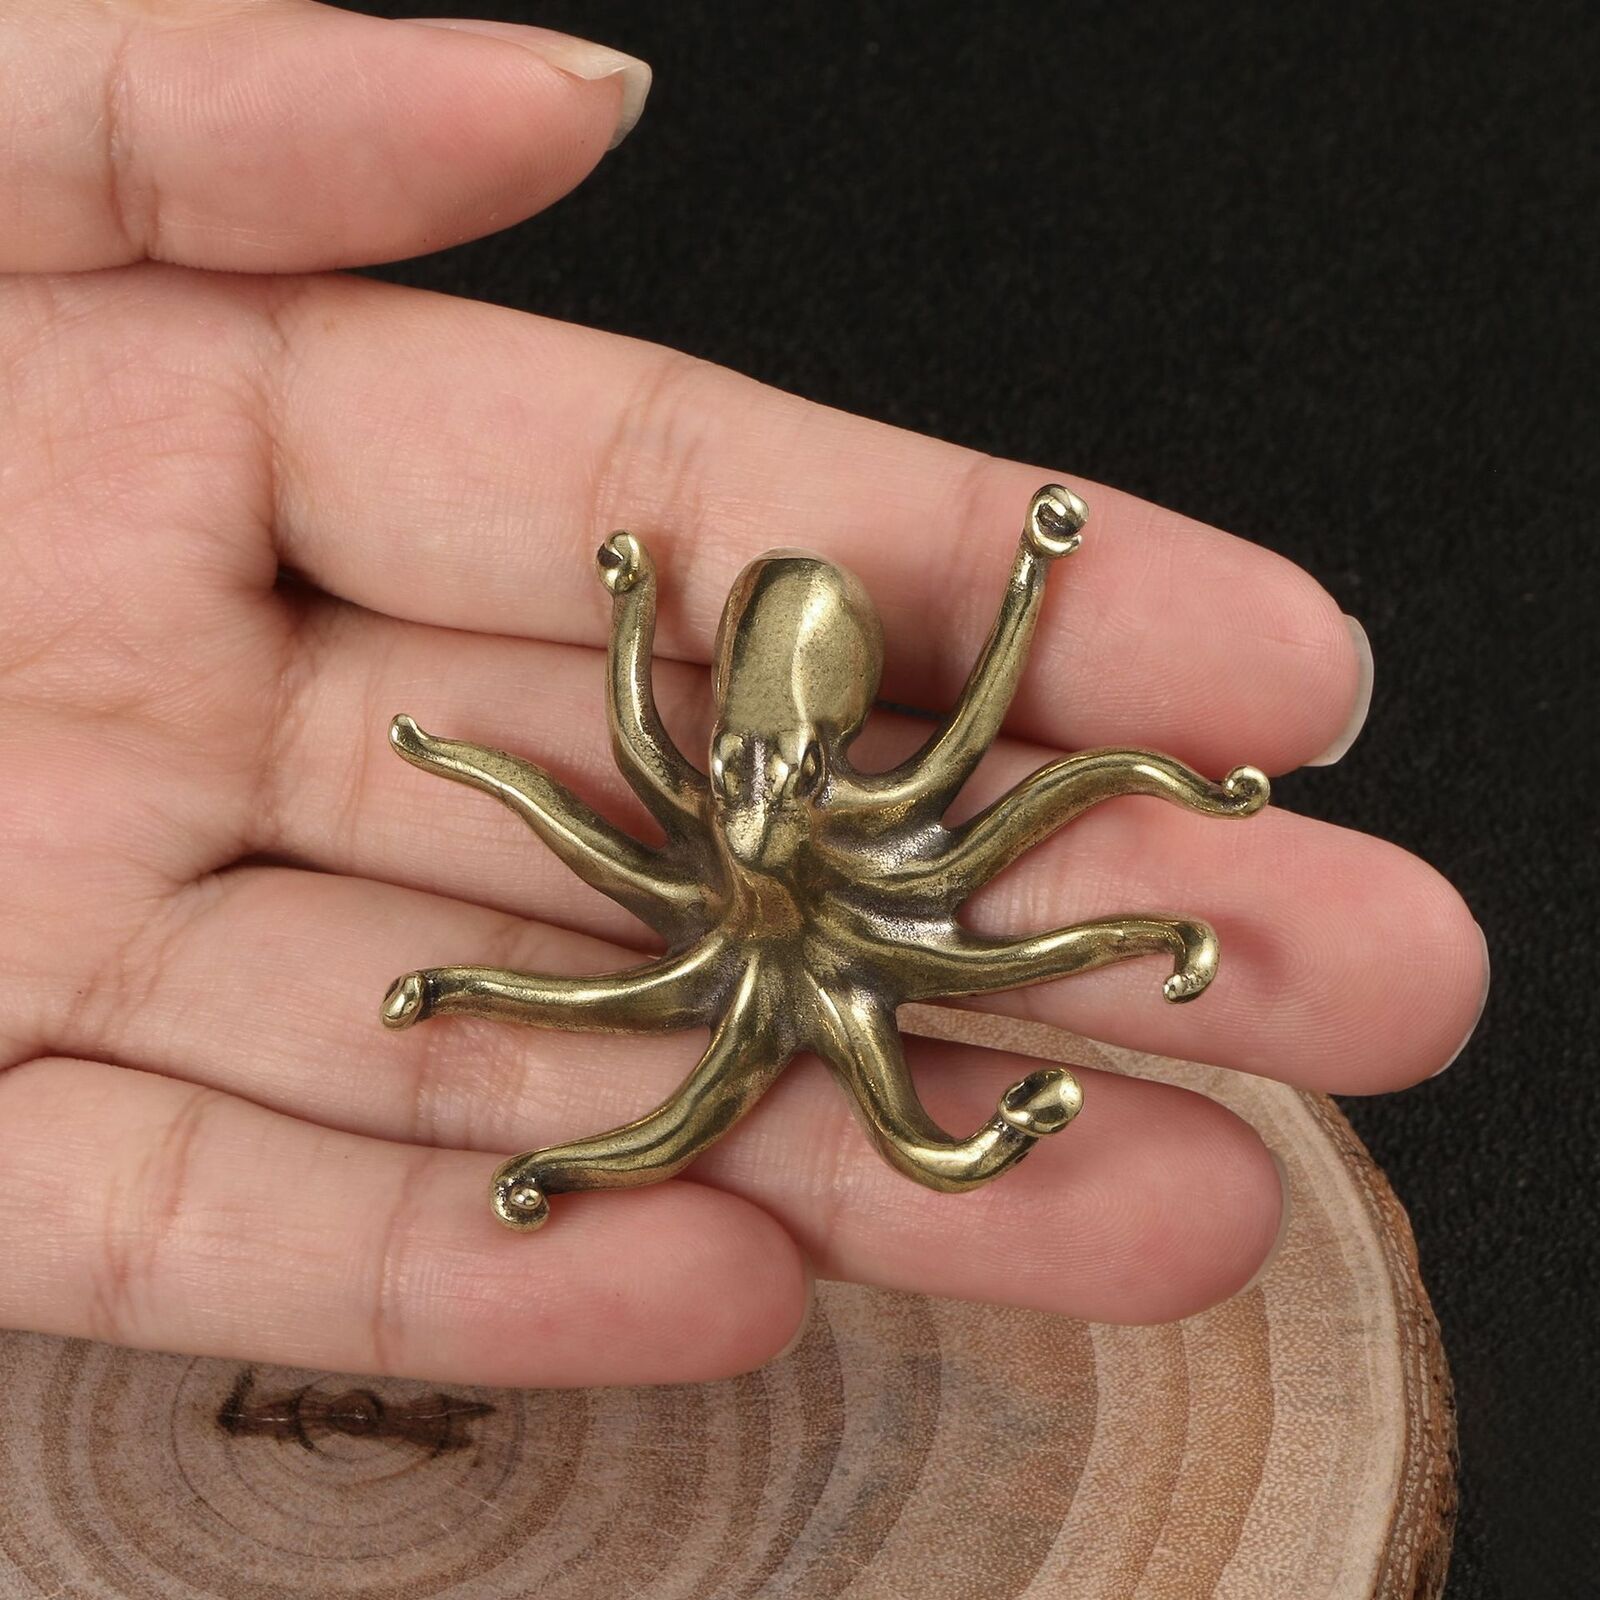 Solid Brass Octopus Figurine Small Statue Home Ornament Figurines Collectibles